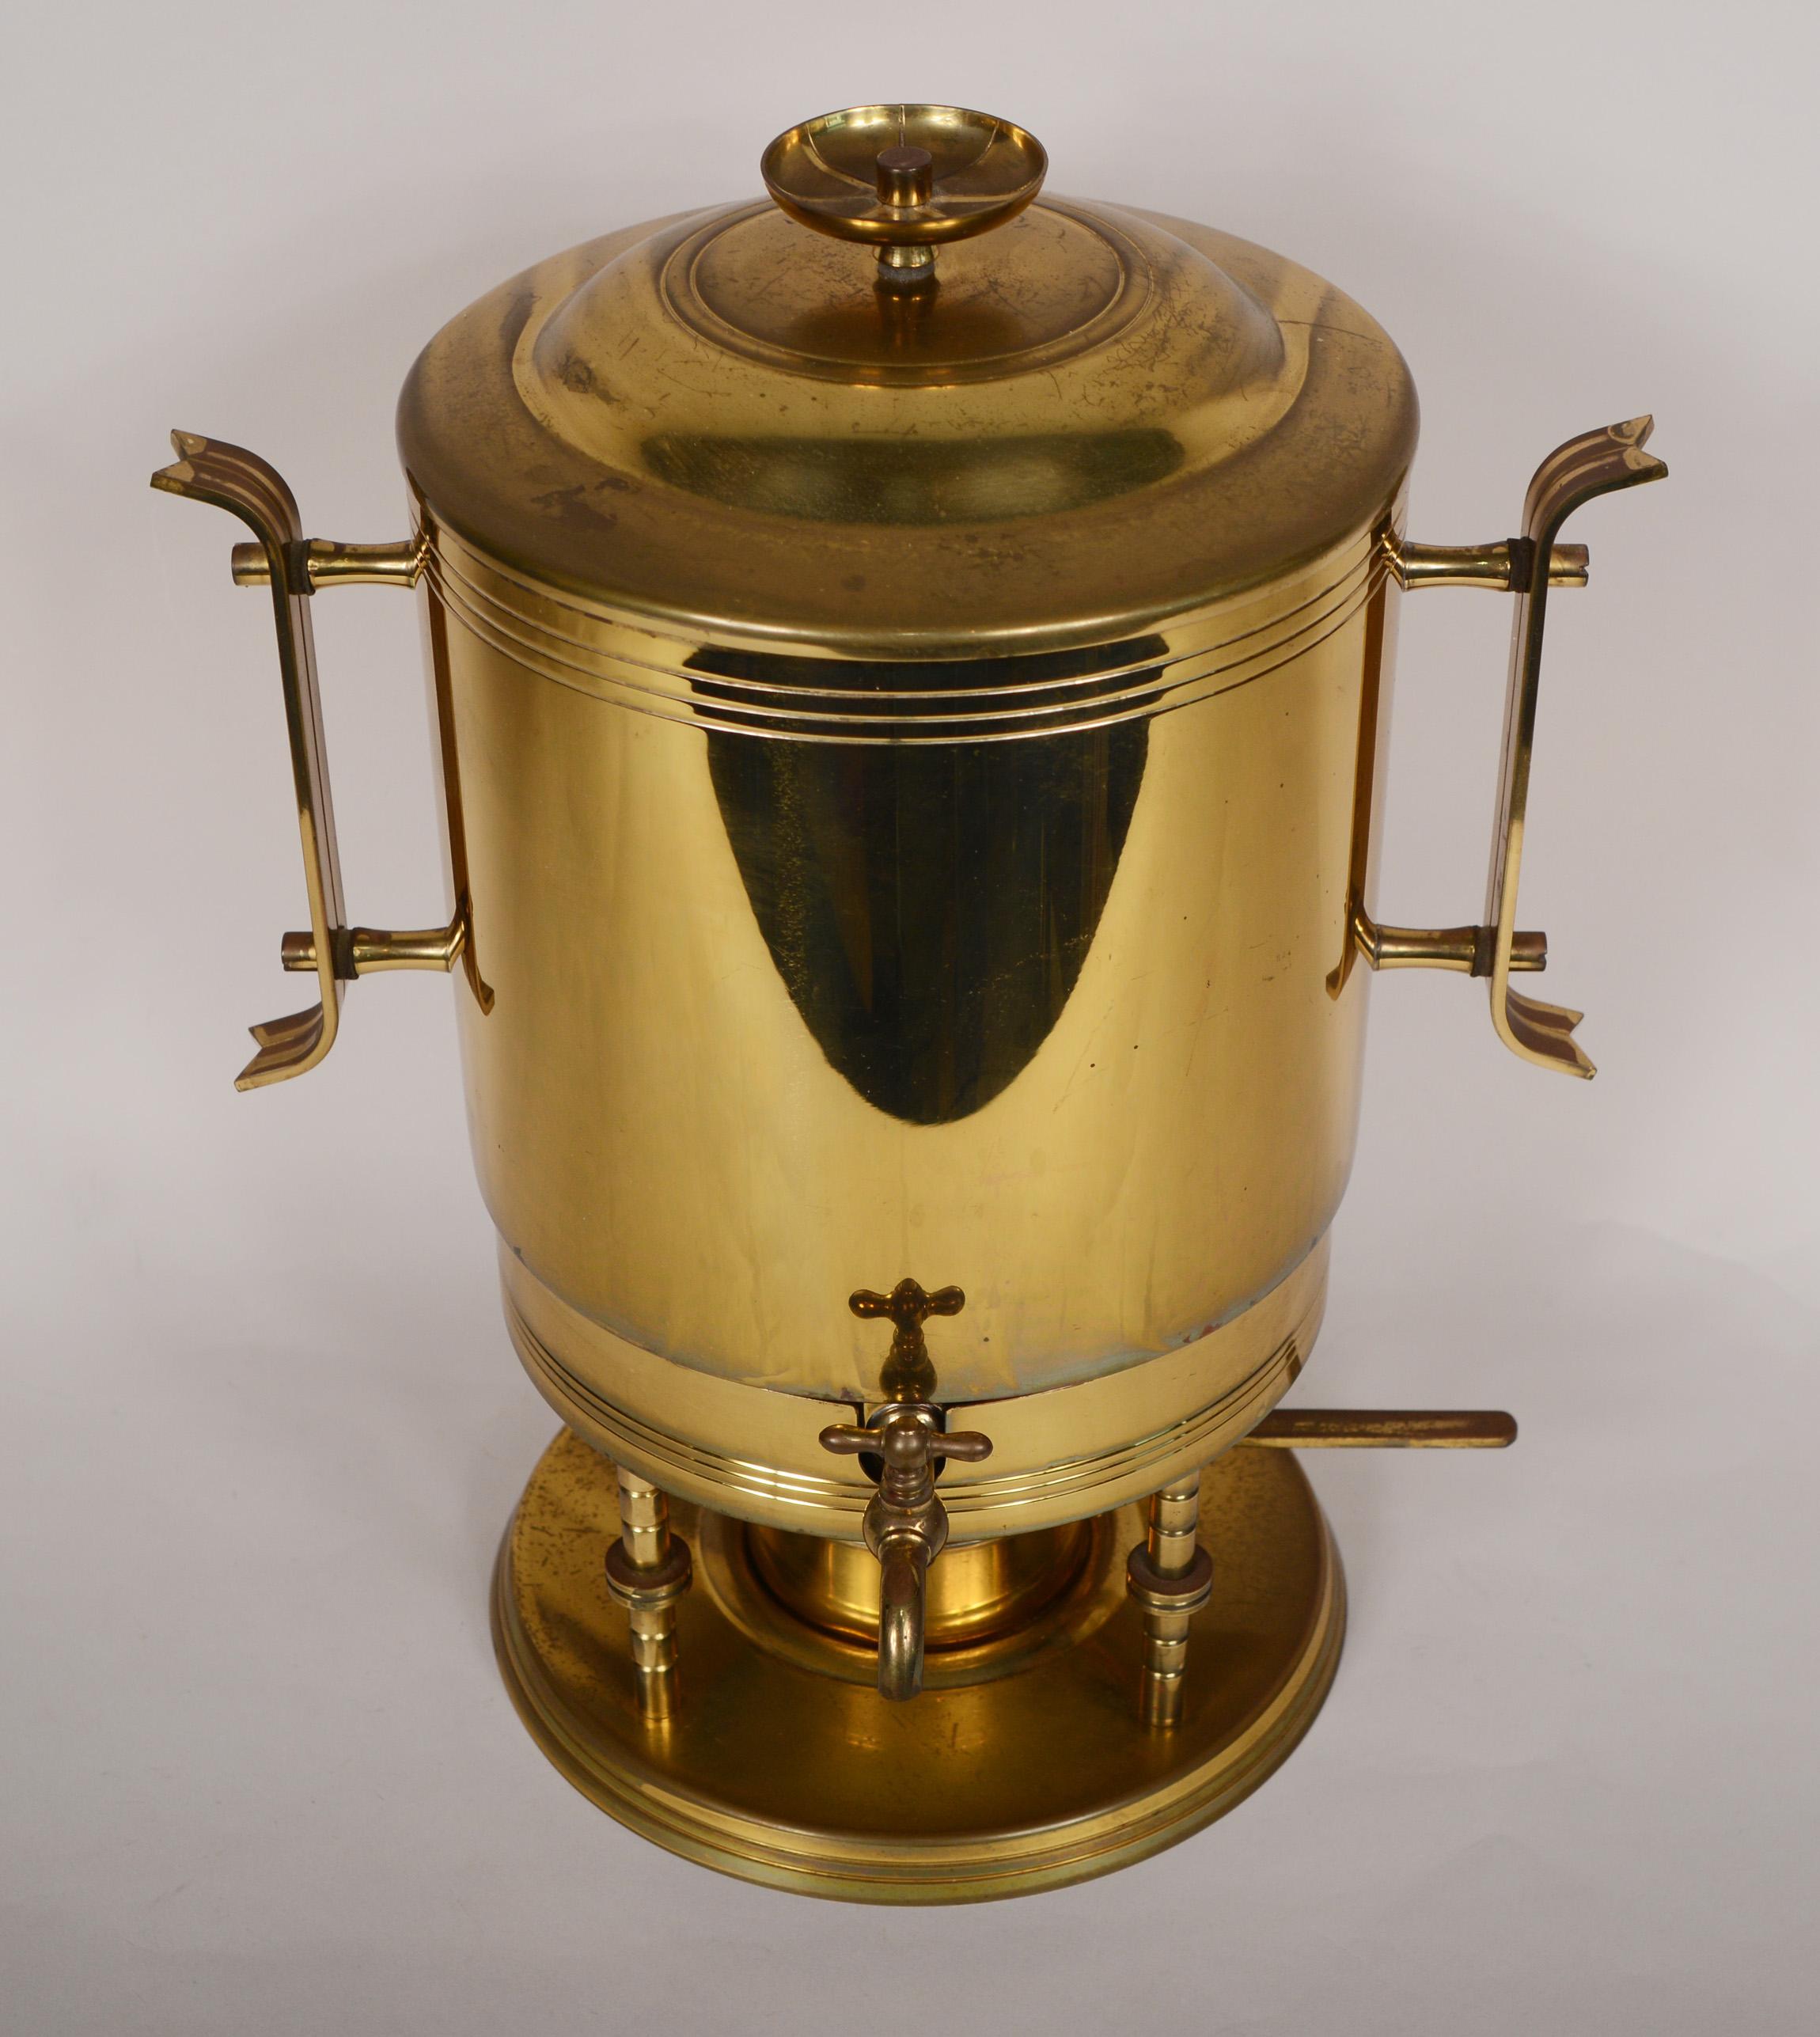 Coffee or hot water urn designed by Tommi Parzinger and made by Dorlyn Silversmiths. This consists of the urn and stand with a burner and snuffer. This has the original finish. There is some discoloration and oxidation to the brass. The stand for